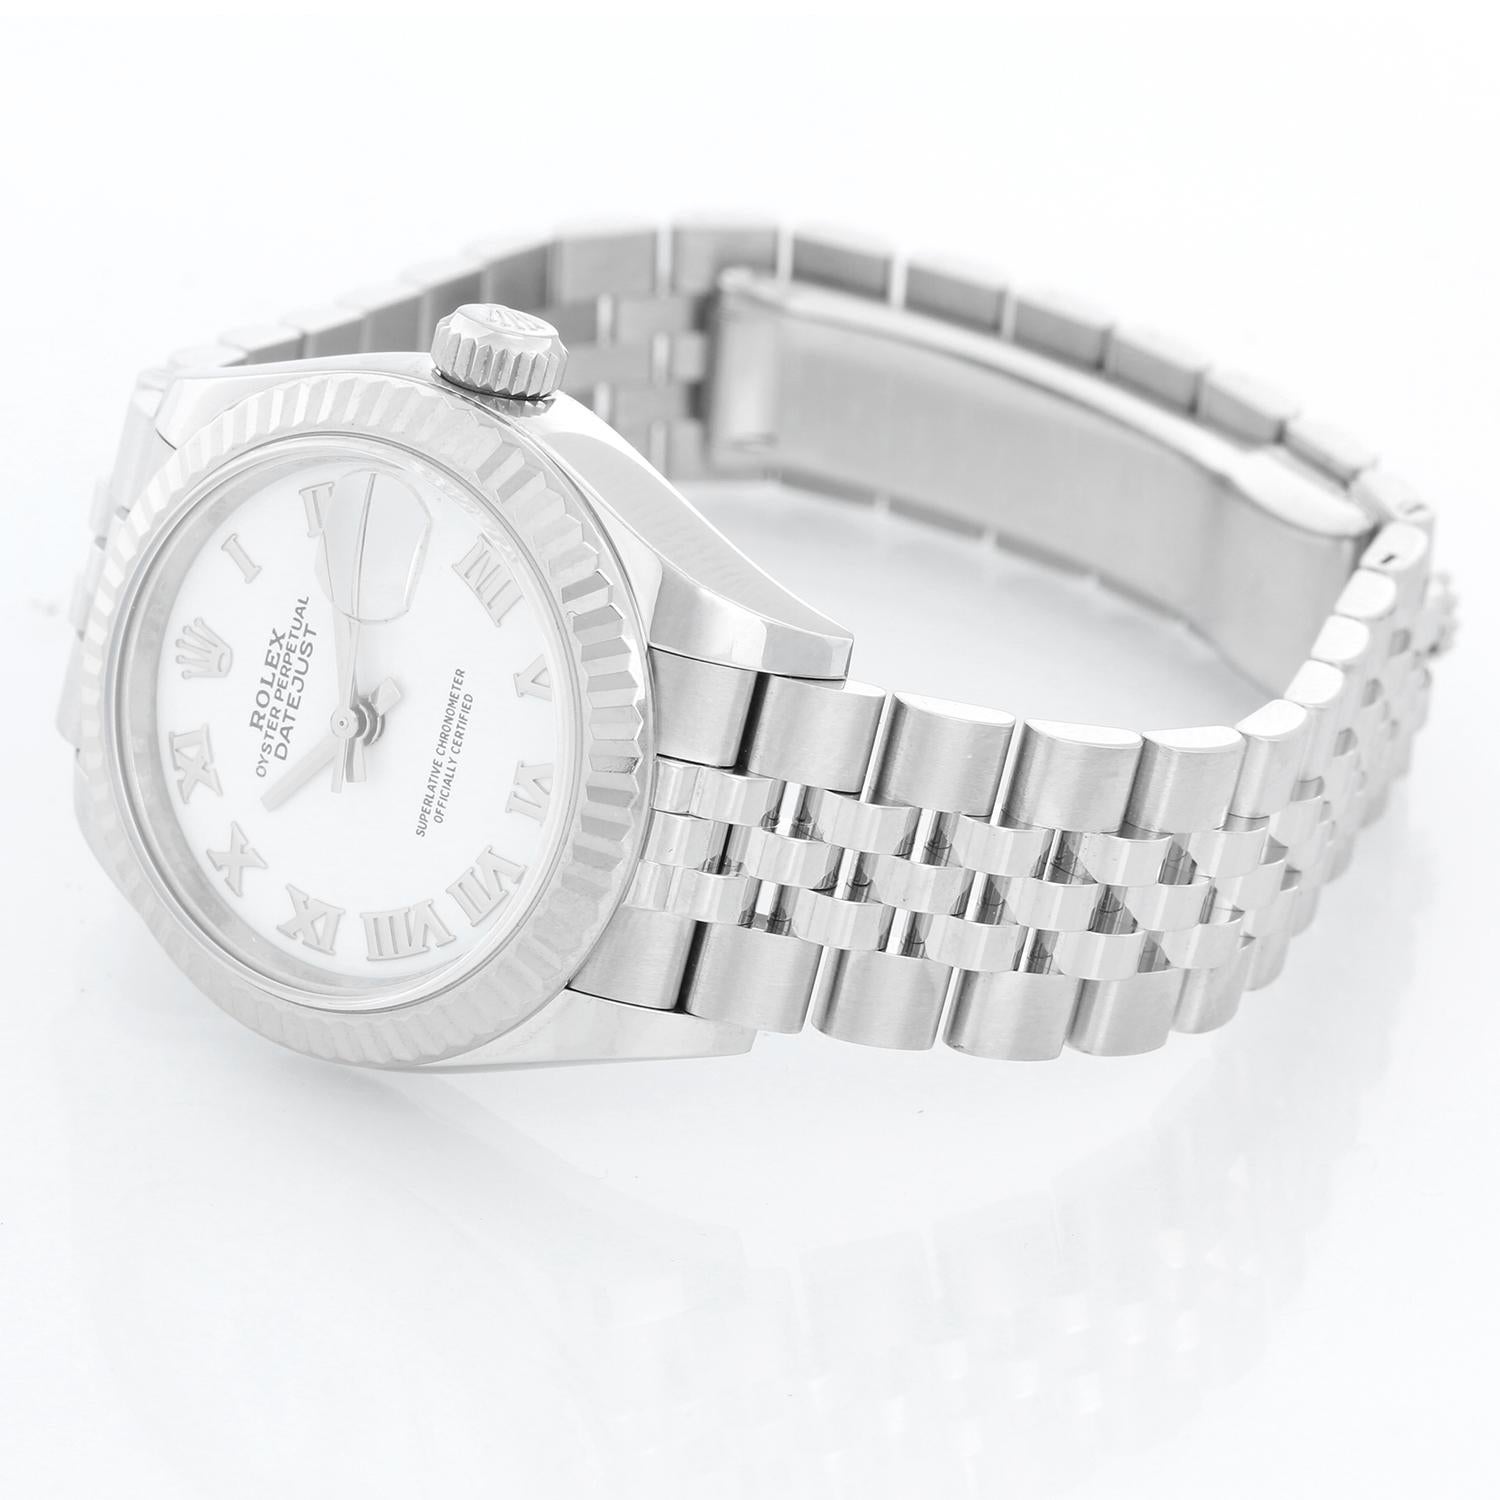 Ladies Rolex Datejust 28mm Stainless Steel White Dial 279174 - Automatic winding, 31 jewels, Quickset date, sapphire crystal. Stainless Steel with fluted bezel ( 28 mm). White dial with Roman numerals. Stainless Steel jubilee bracelet. Pre-owned